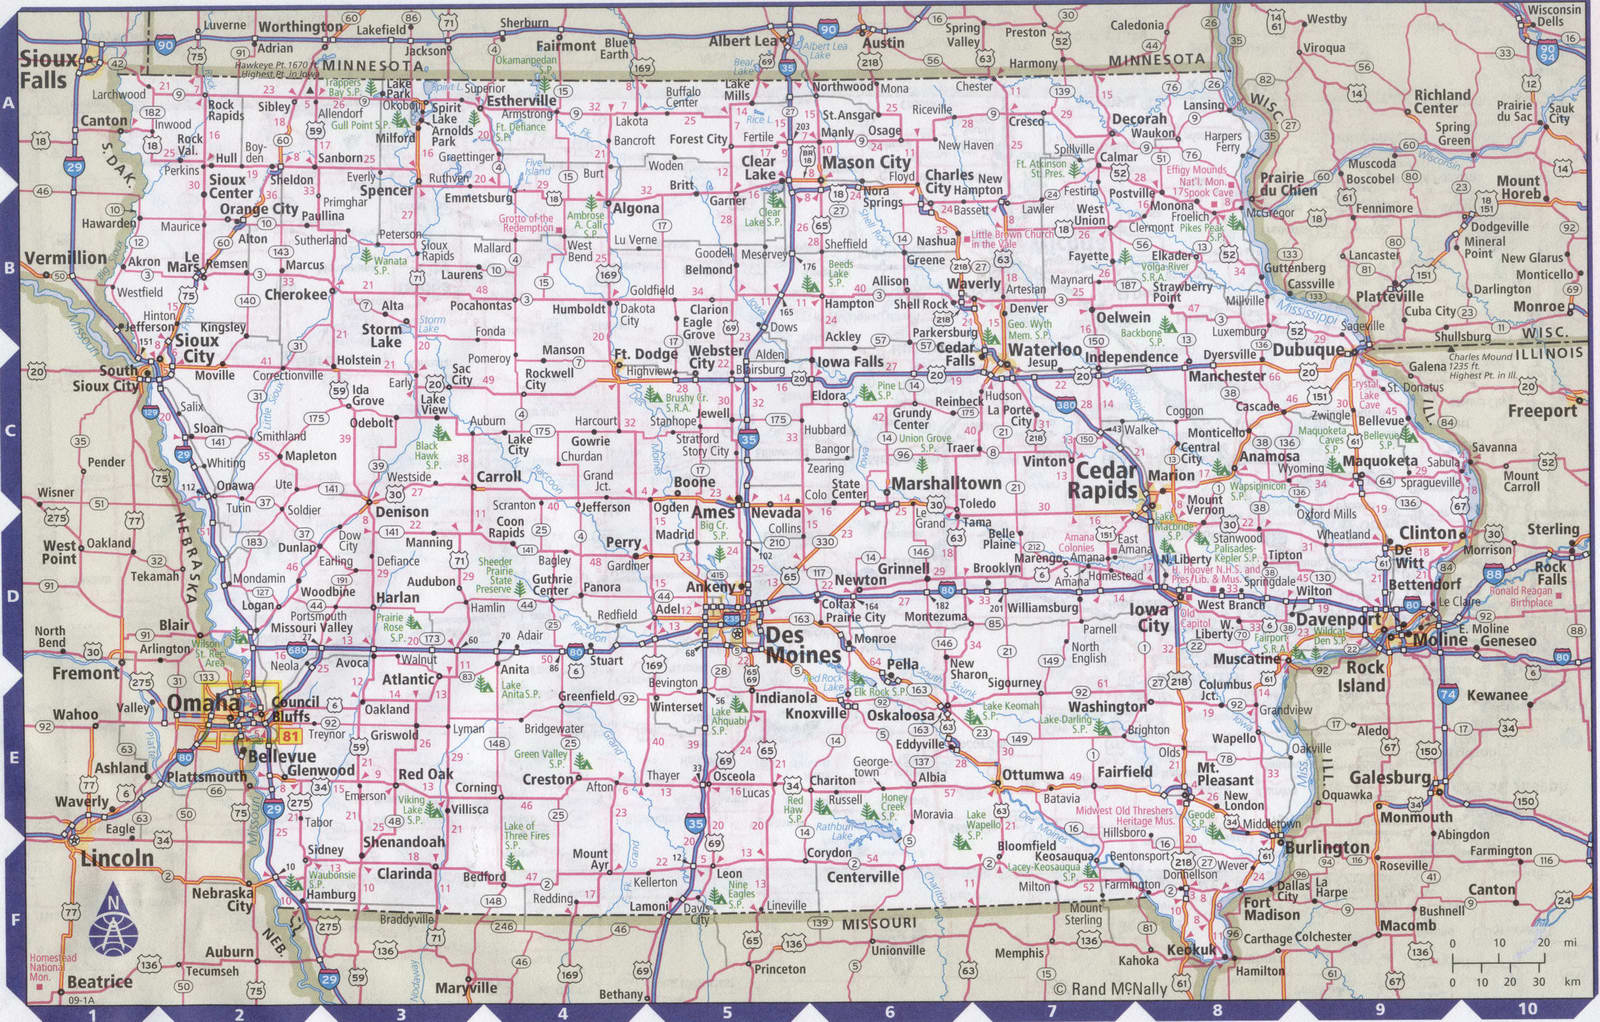 Iowa state complete map